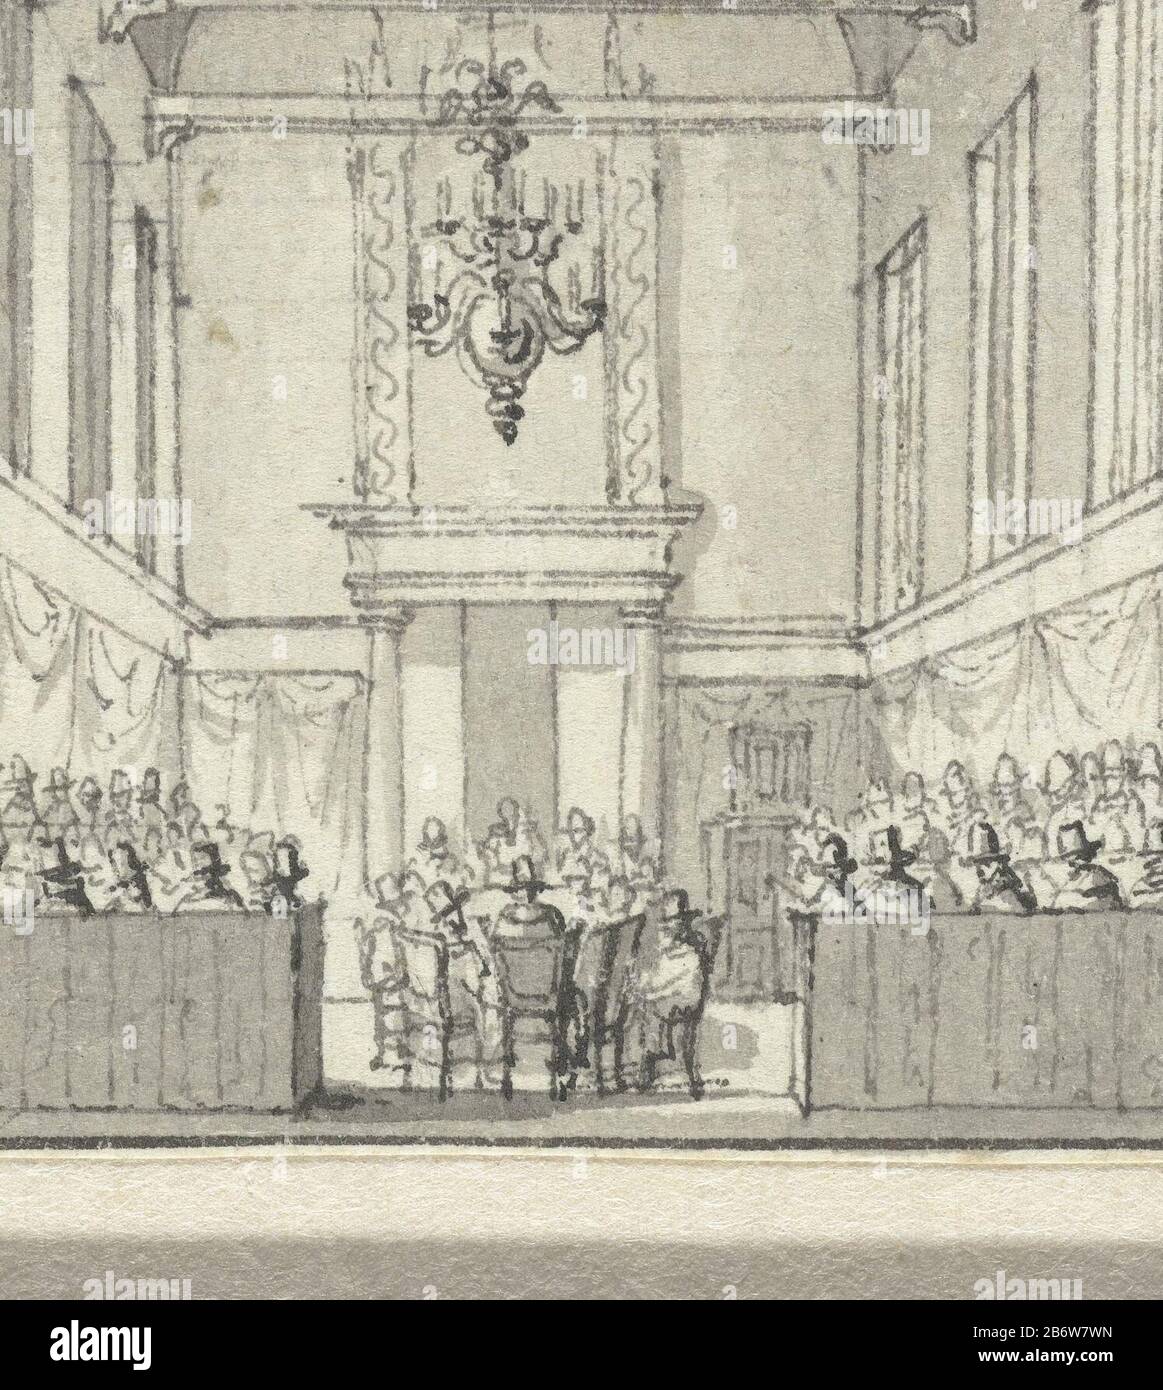 In 't Jaar 1618 en 1619 National Synod of Dordrecht, 1618-1619. Manufacturer : artist: anonymous artist: Jacques Kuyper (rejected attribution) Place manufacture: The Netherlands Date: ca. 1789 - ca. 1810 Physical characteristics: pen or brush in gray material: paper ink Technique: pen / brush dimensions: h 65 mm × b 55 mm Subject: organisaties, assemblies, etc. in Protestant churches remonstrants and counter-Remonstrants synod of Dordrecht When: 1618 - 1619 Stock Photo